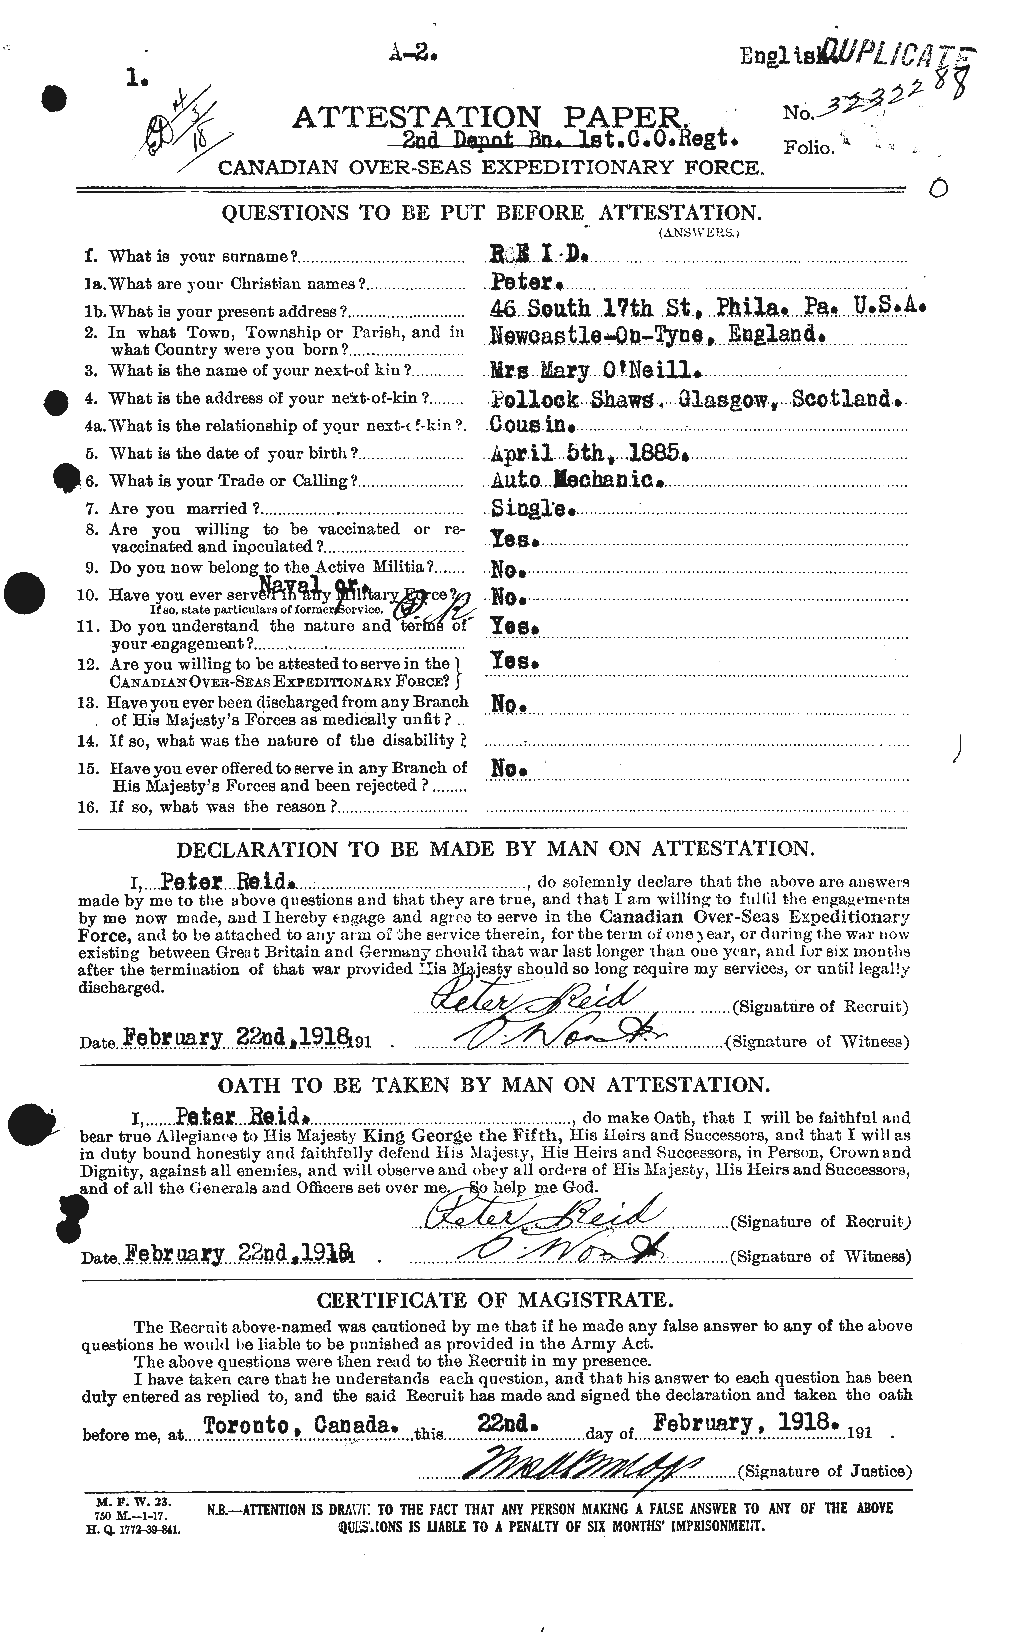 Personnel Records of the First World War - CEF 601837a